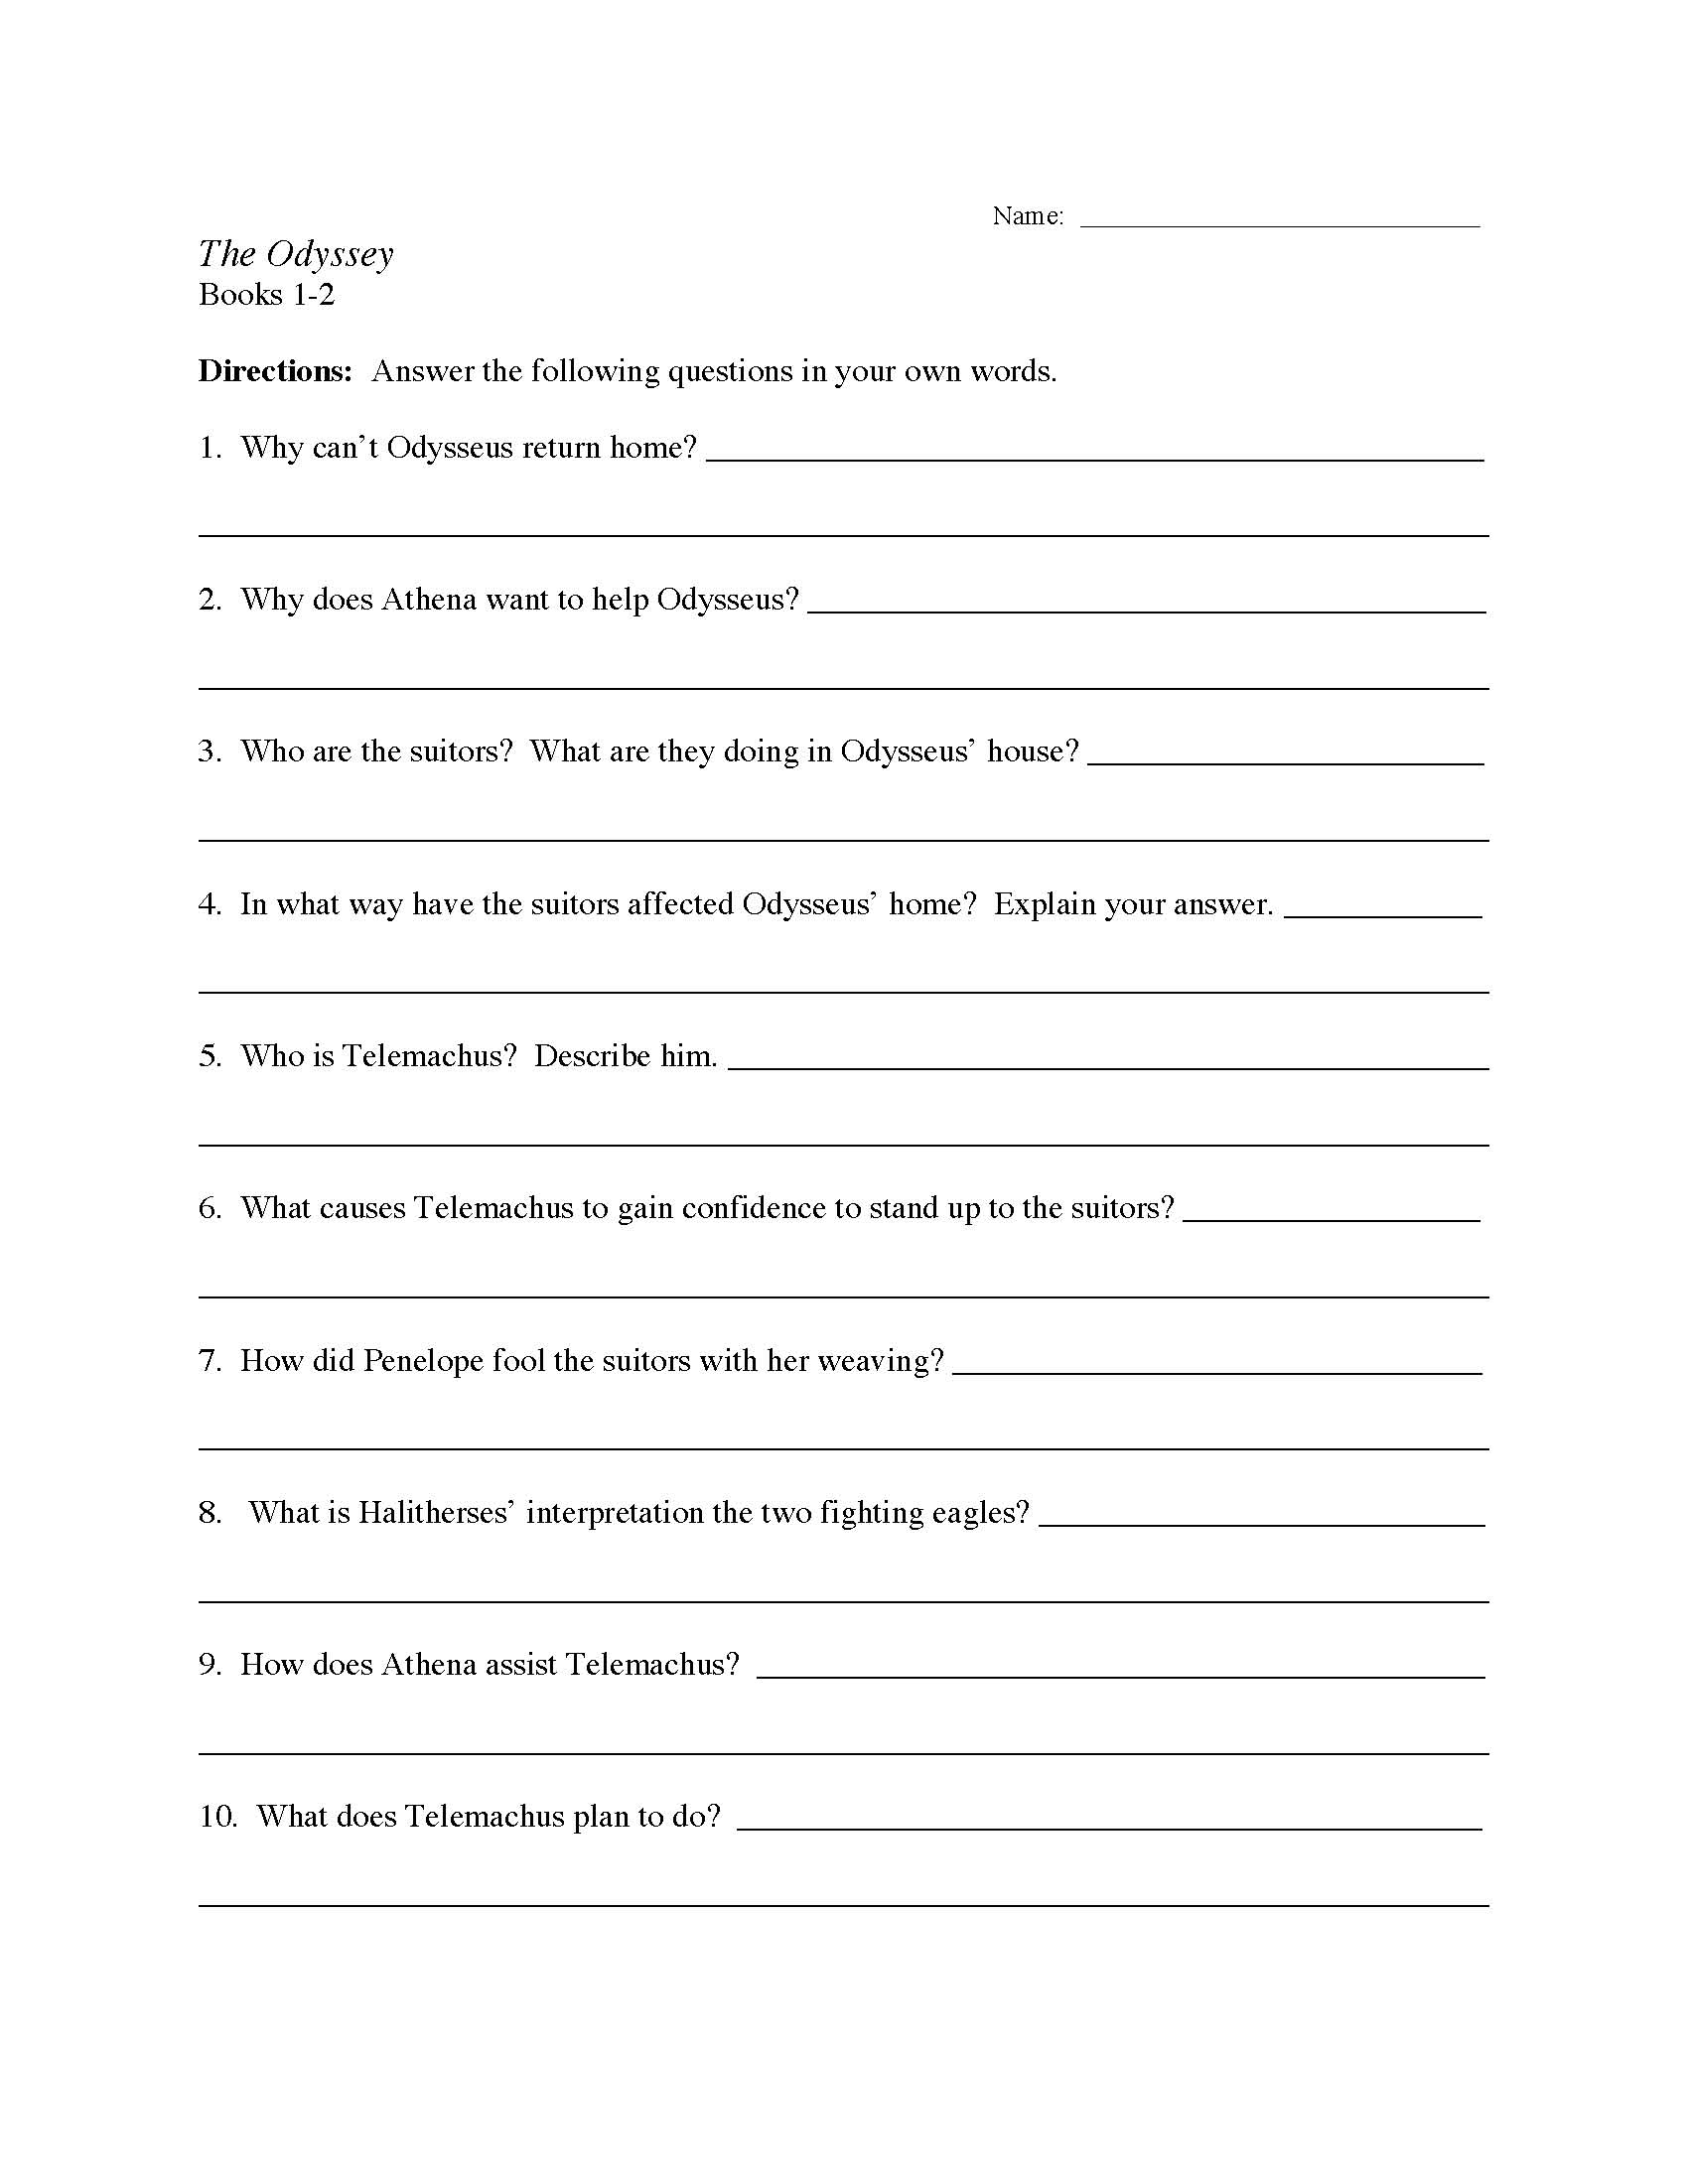 The Odyssey Chapters 1 2 Worksheet Preview